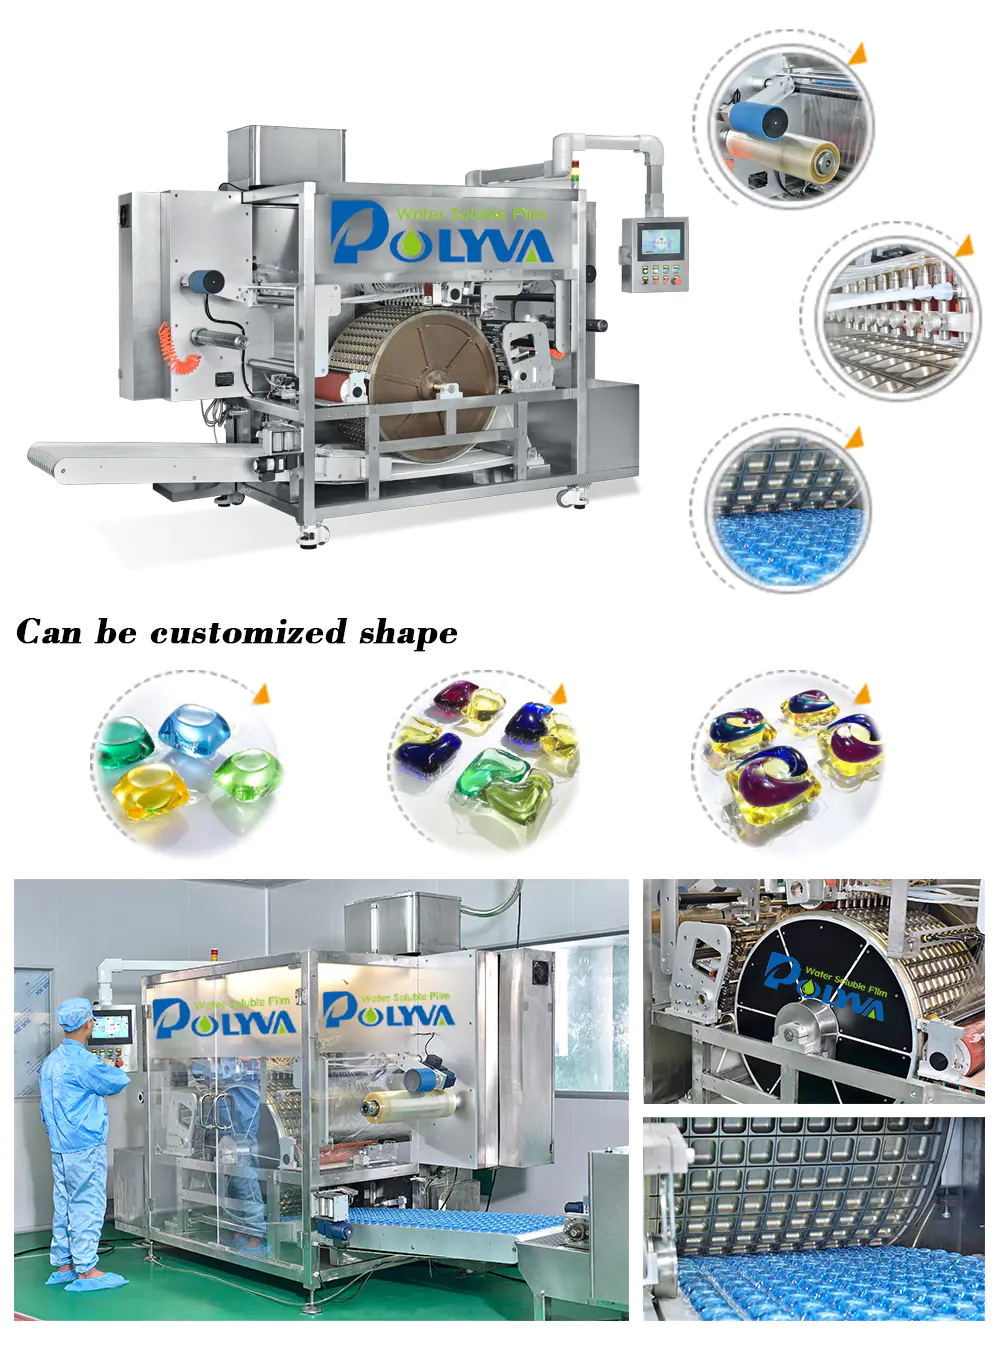 POLYVA professional water soluble film packaging factory for oil chemicals agent